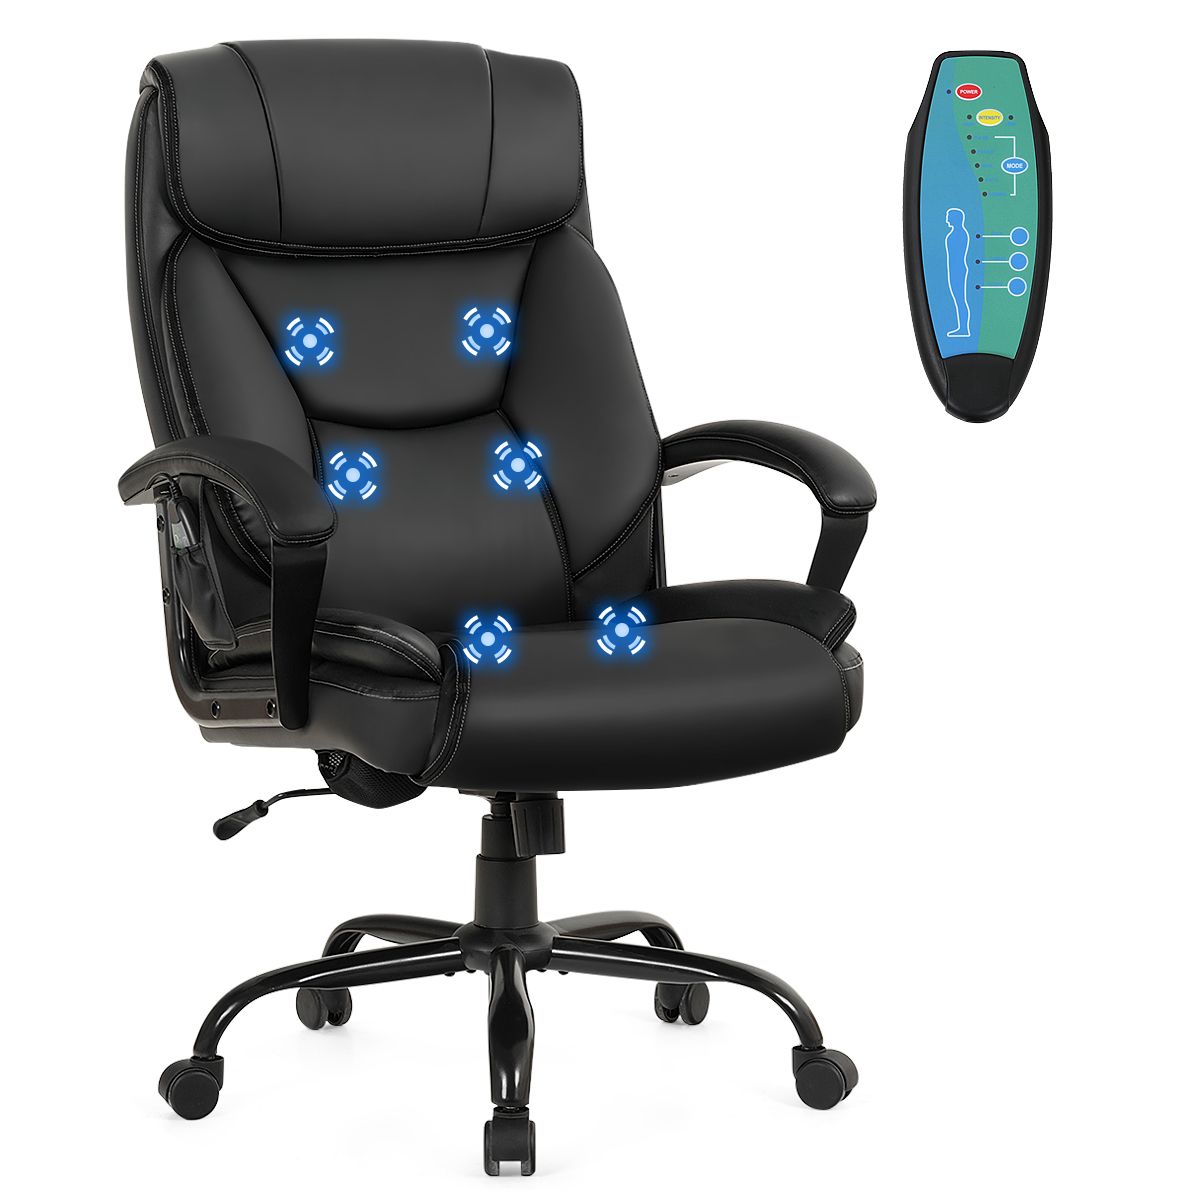 Executive Chair with 6 Point Massage and Adjustable High Back